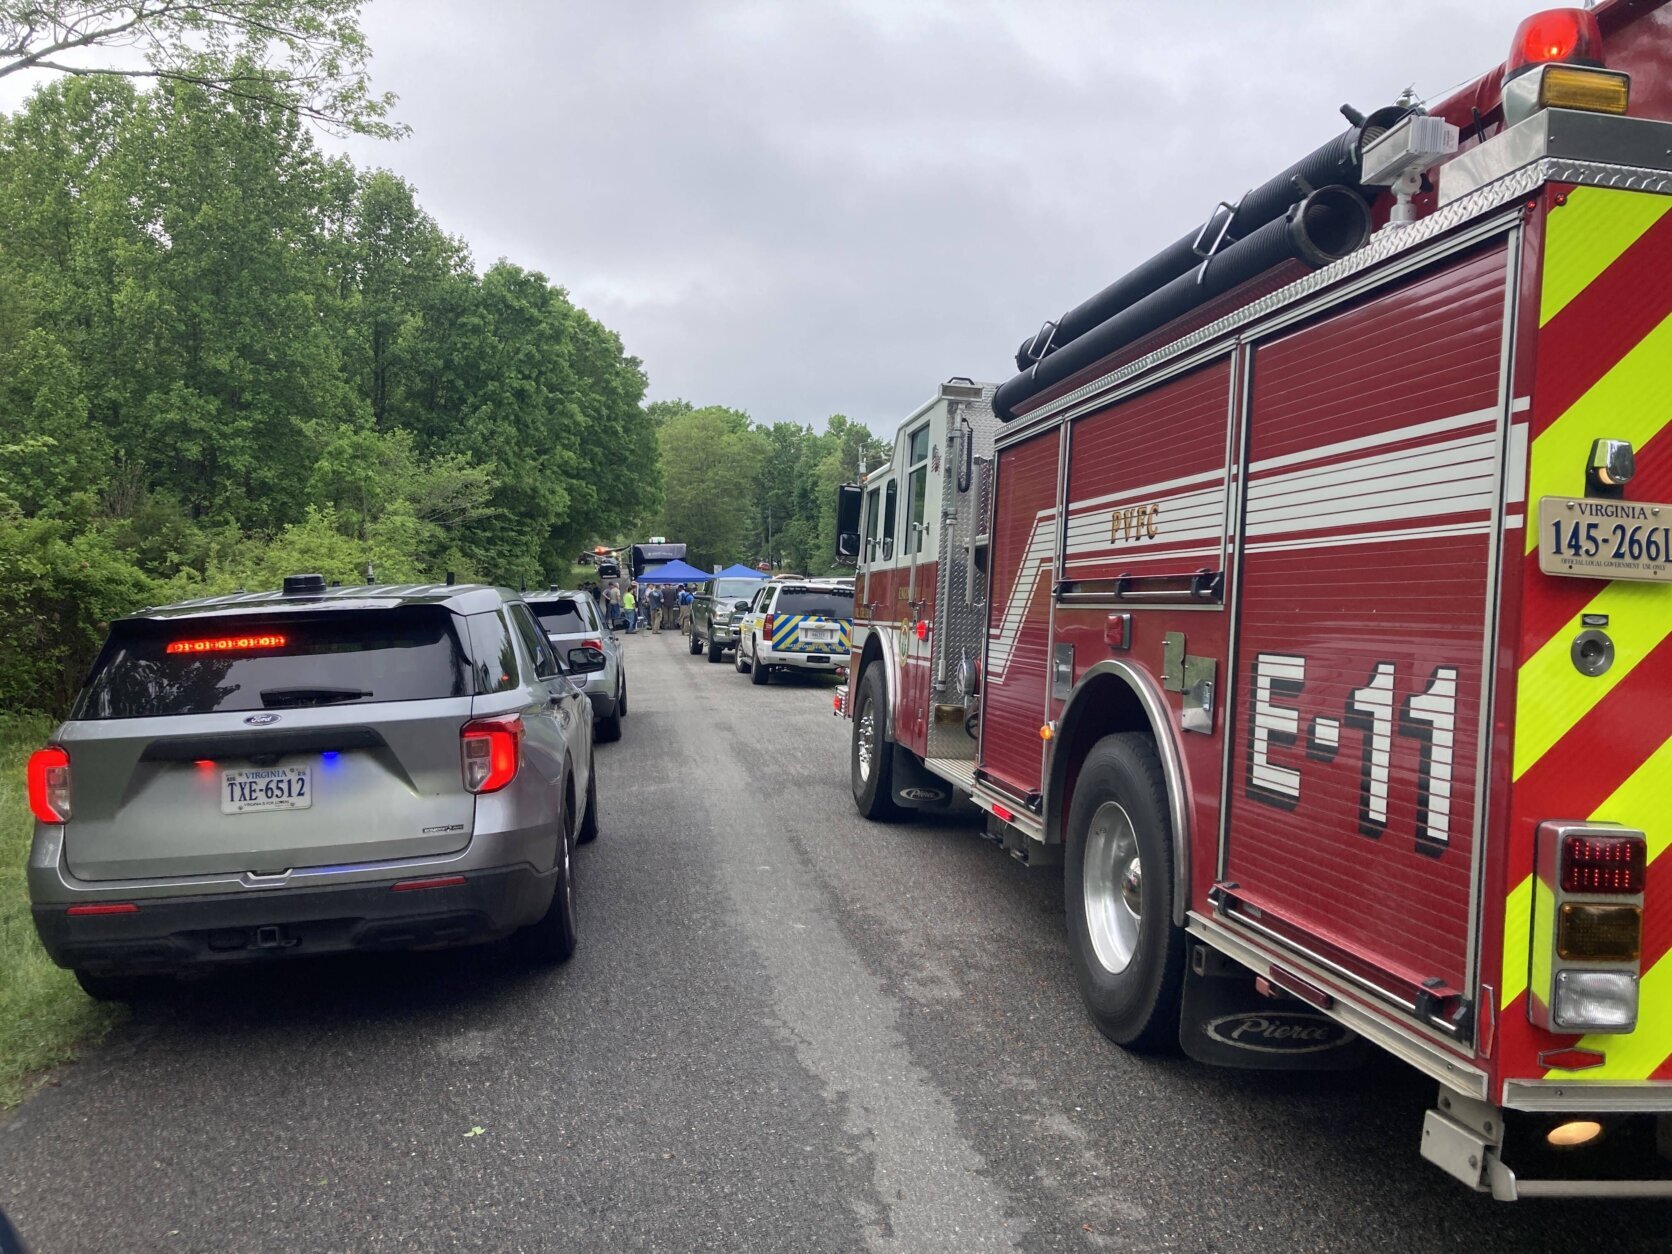 Two people were killed when a small plane headed for South Carolina crashed in Virginia, authorities said. (Courtesy Virginia State Police)